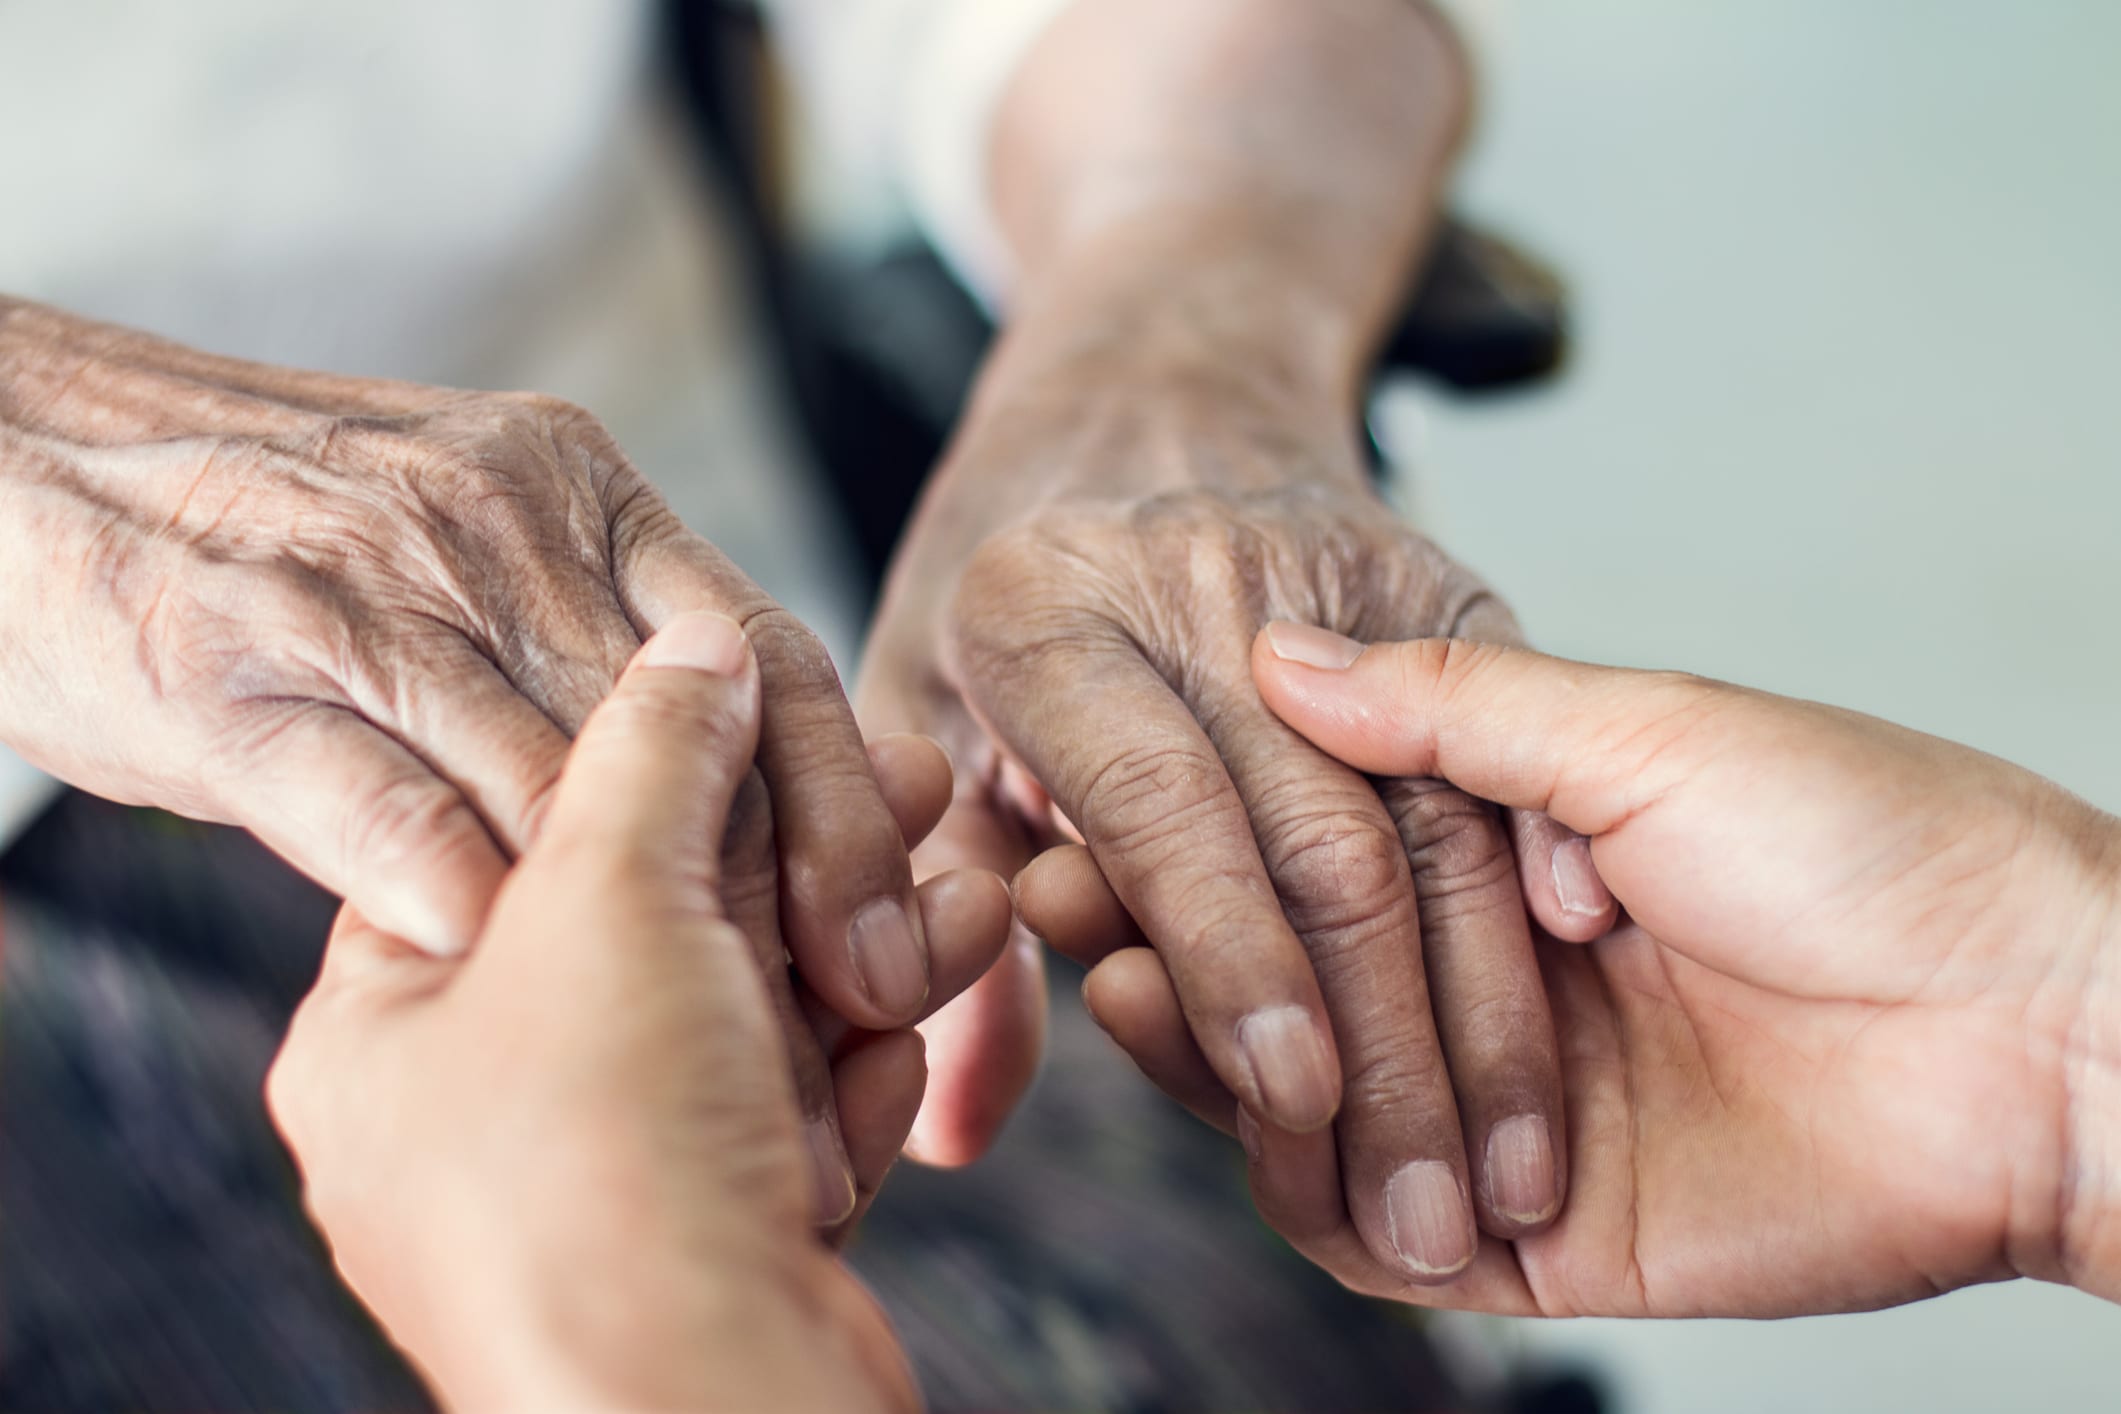 Govt White Paper proposes higher grant, better recognition and support for caregivers